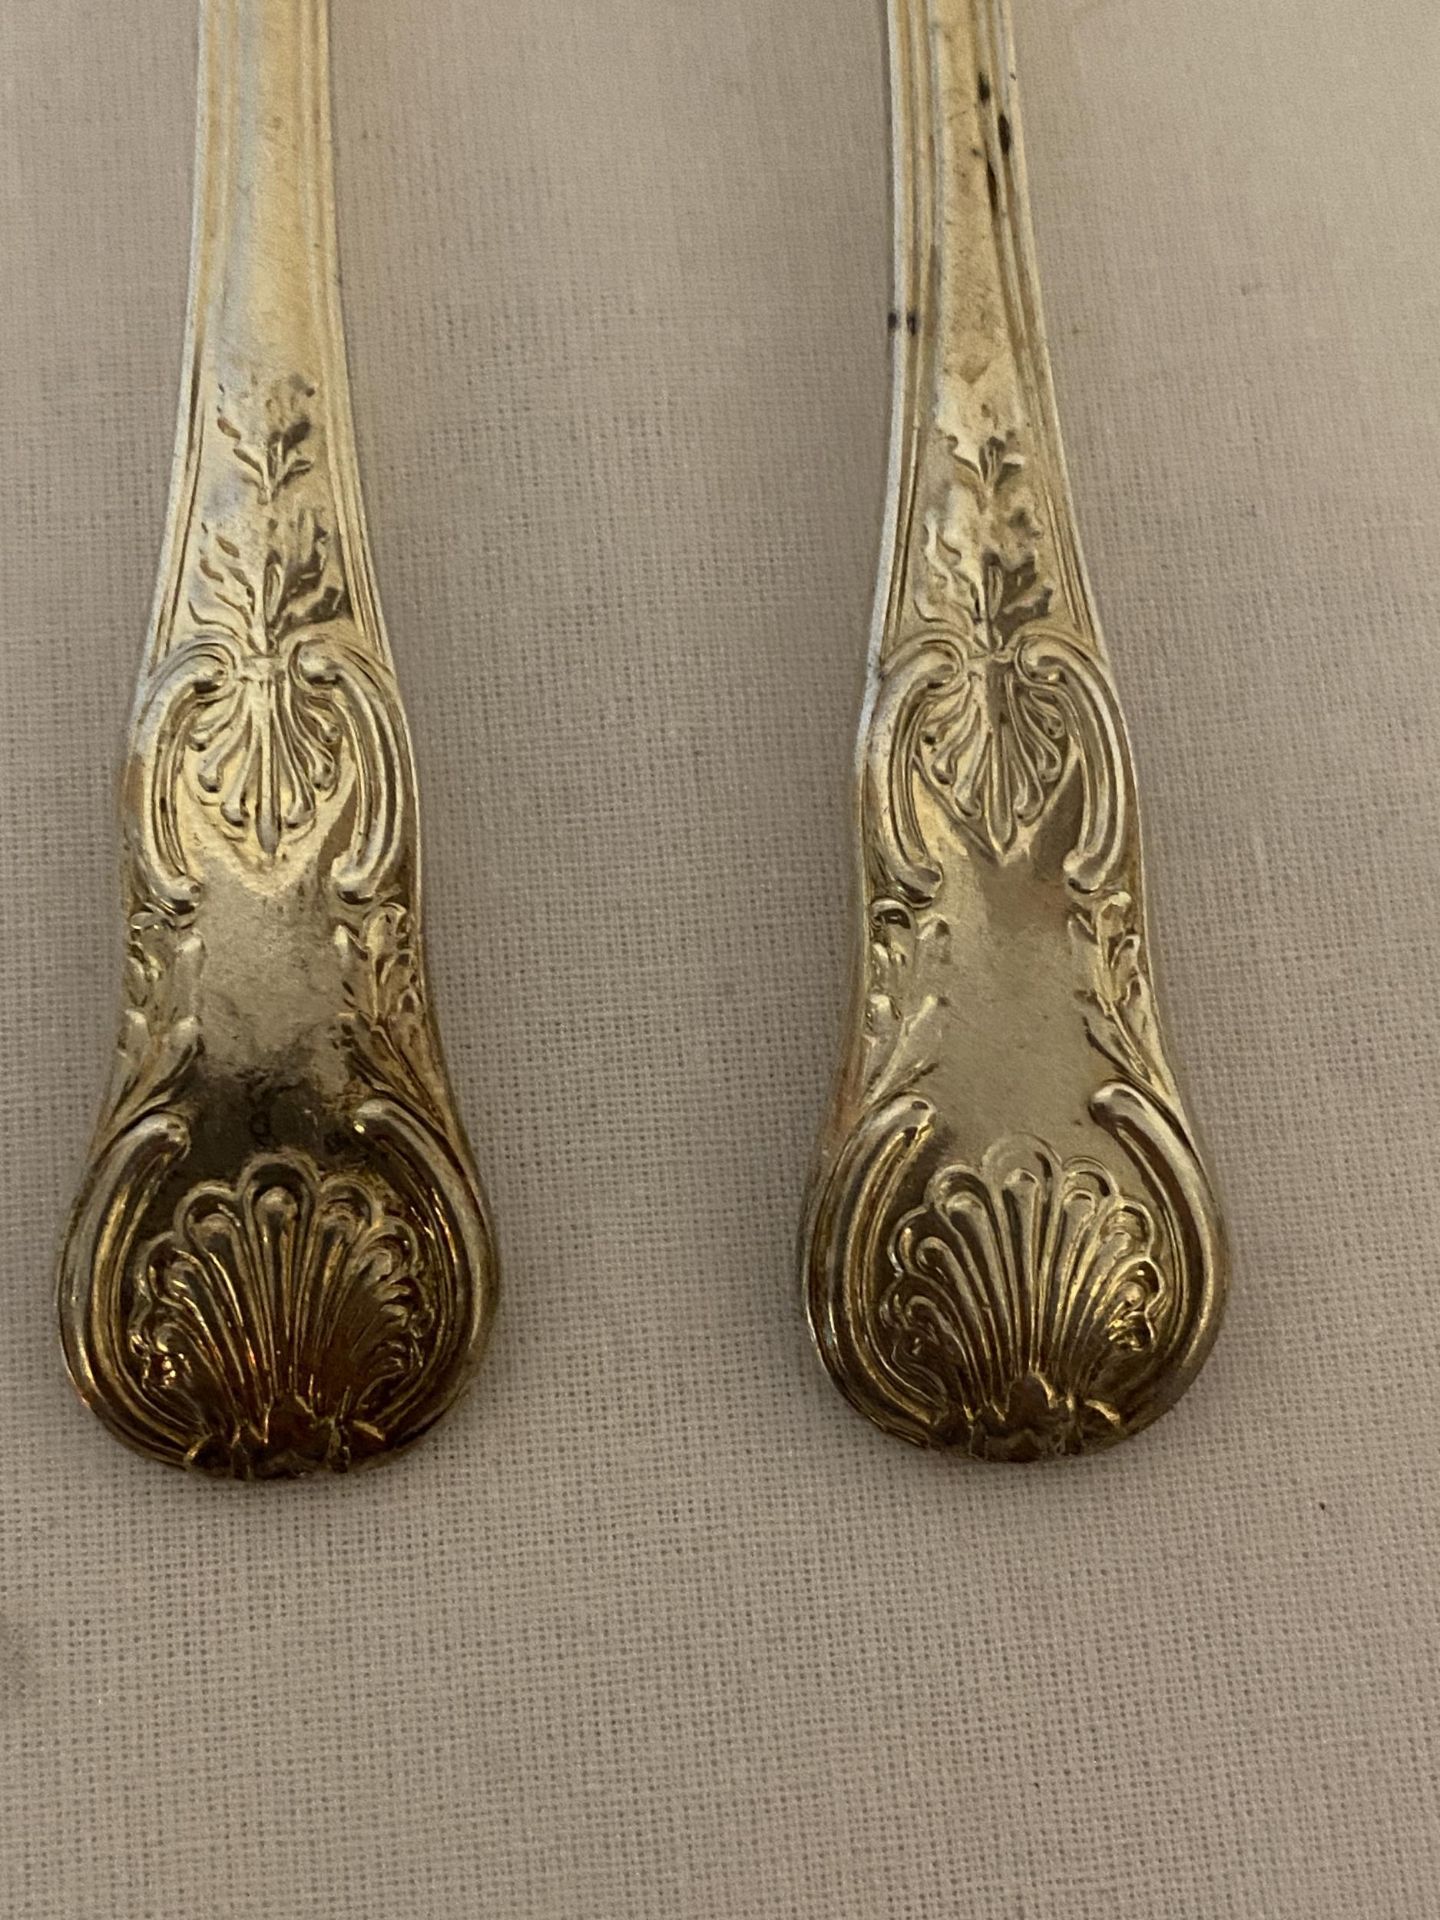 A PAIR OF WILLIAM IV 1832 HALLMARKED LONDON SILVER TEASPOONS, MAKER W.F, POSSIBLY WILLIAM - Image 6 of 18